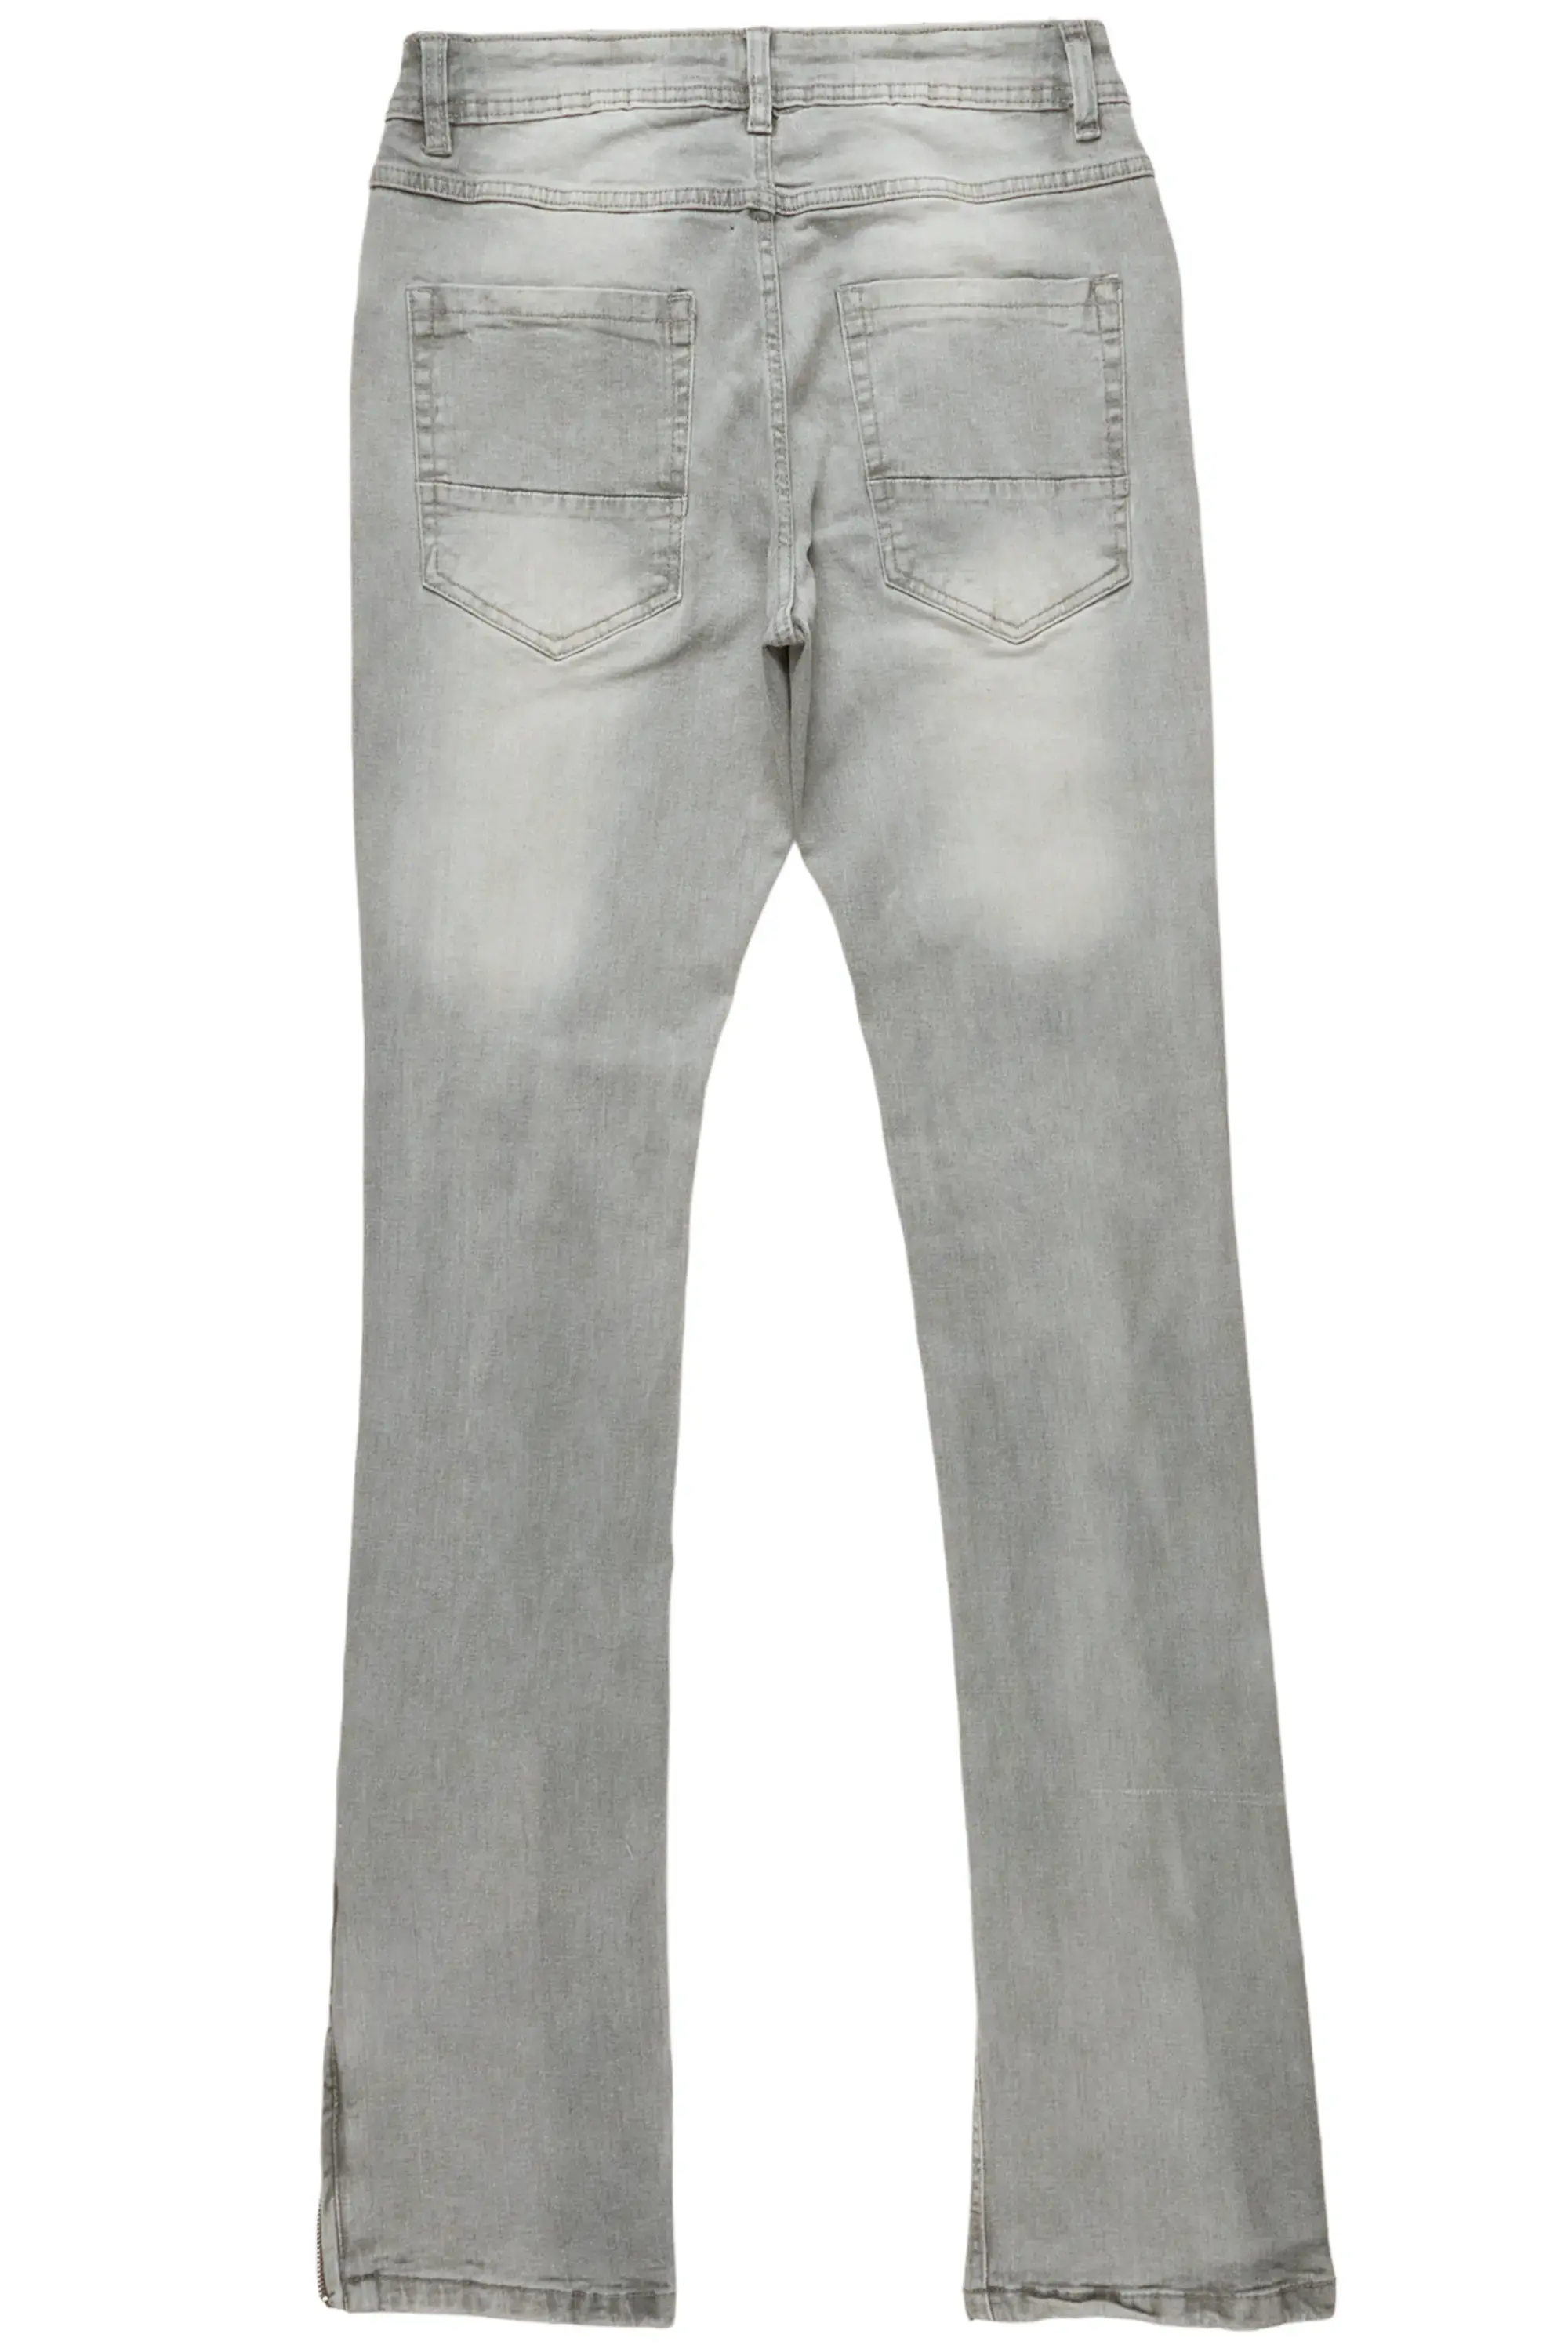 Discover more than 171 light grey denim jeans latest